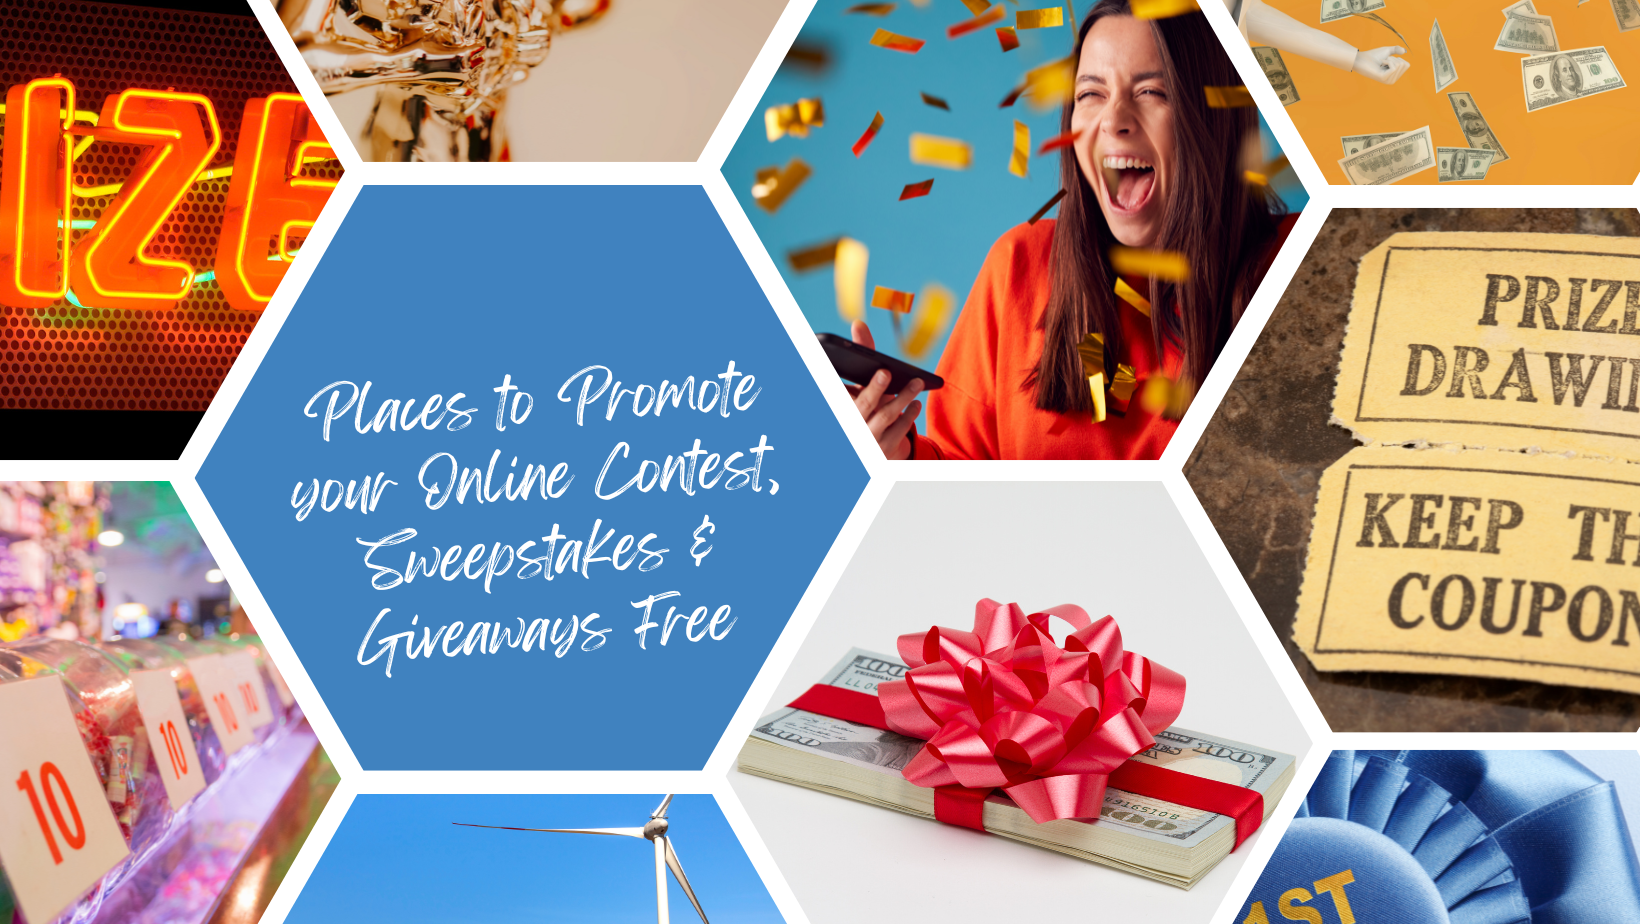 Places to Promote your Online Contest, Sweepstakes & Giveaways Free